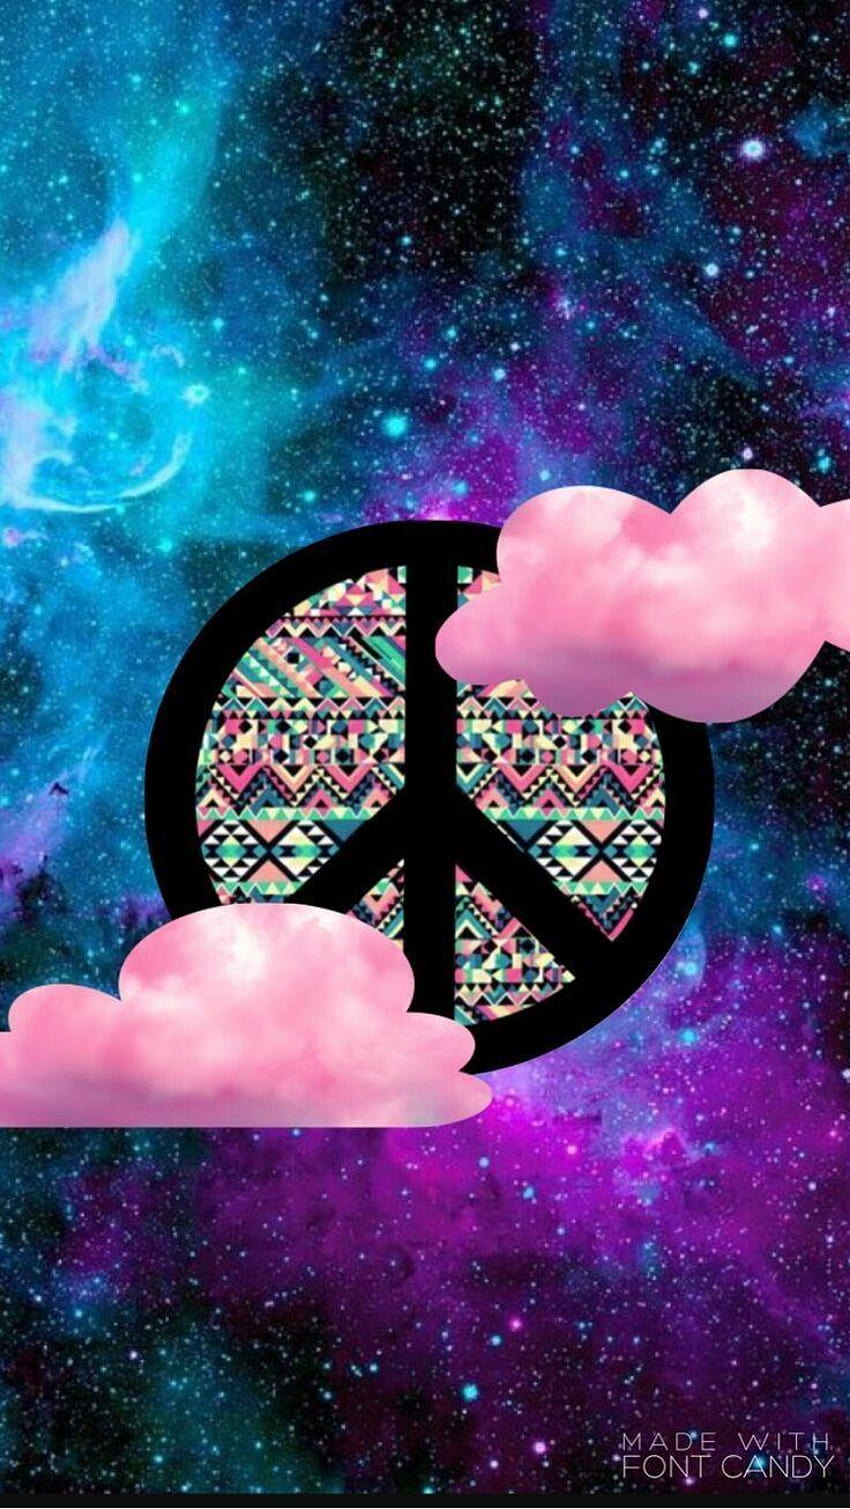 Ashley&Nick on just me✌, peace hippie HD phone wallpaper